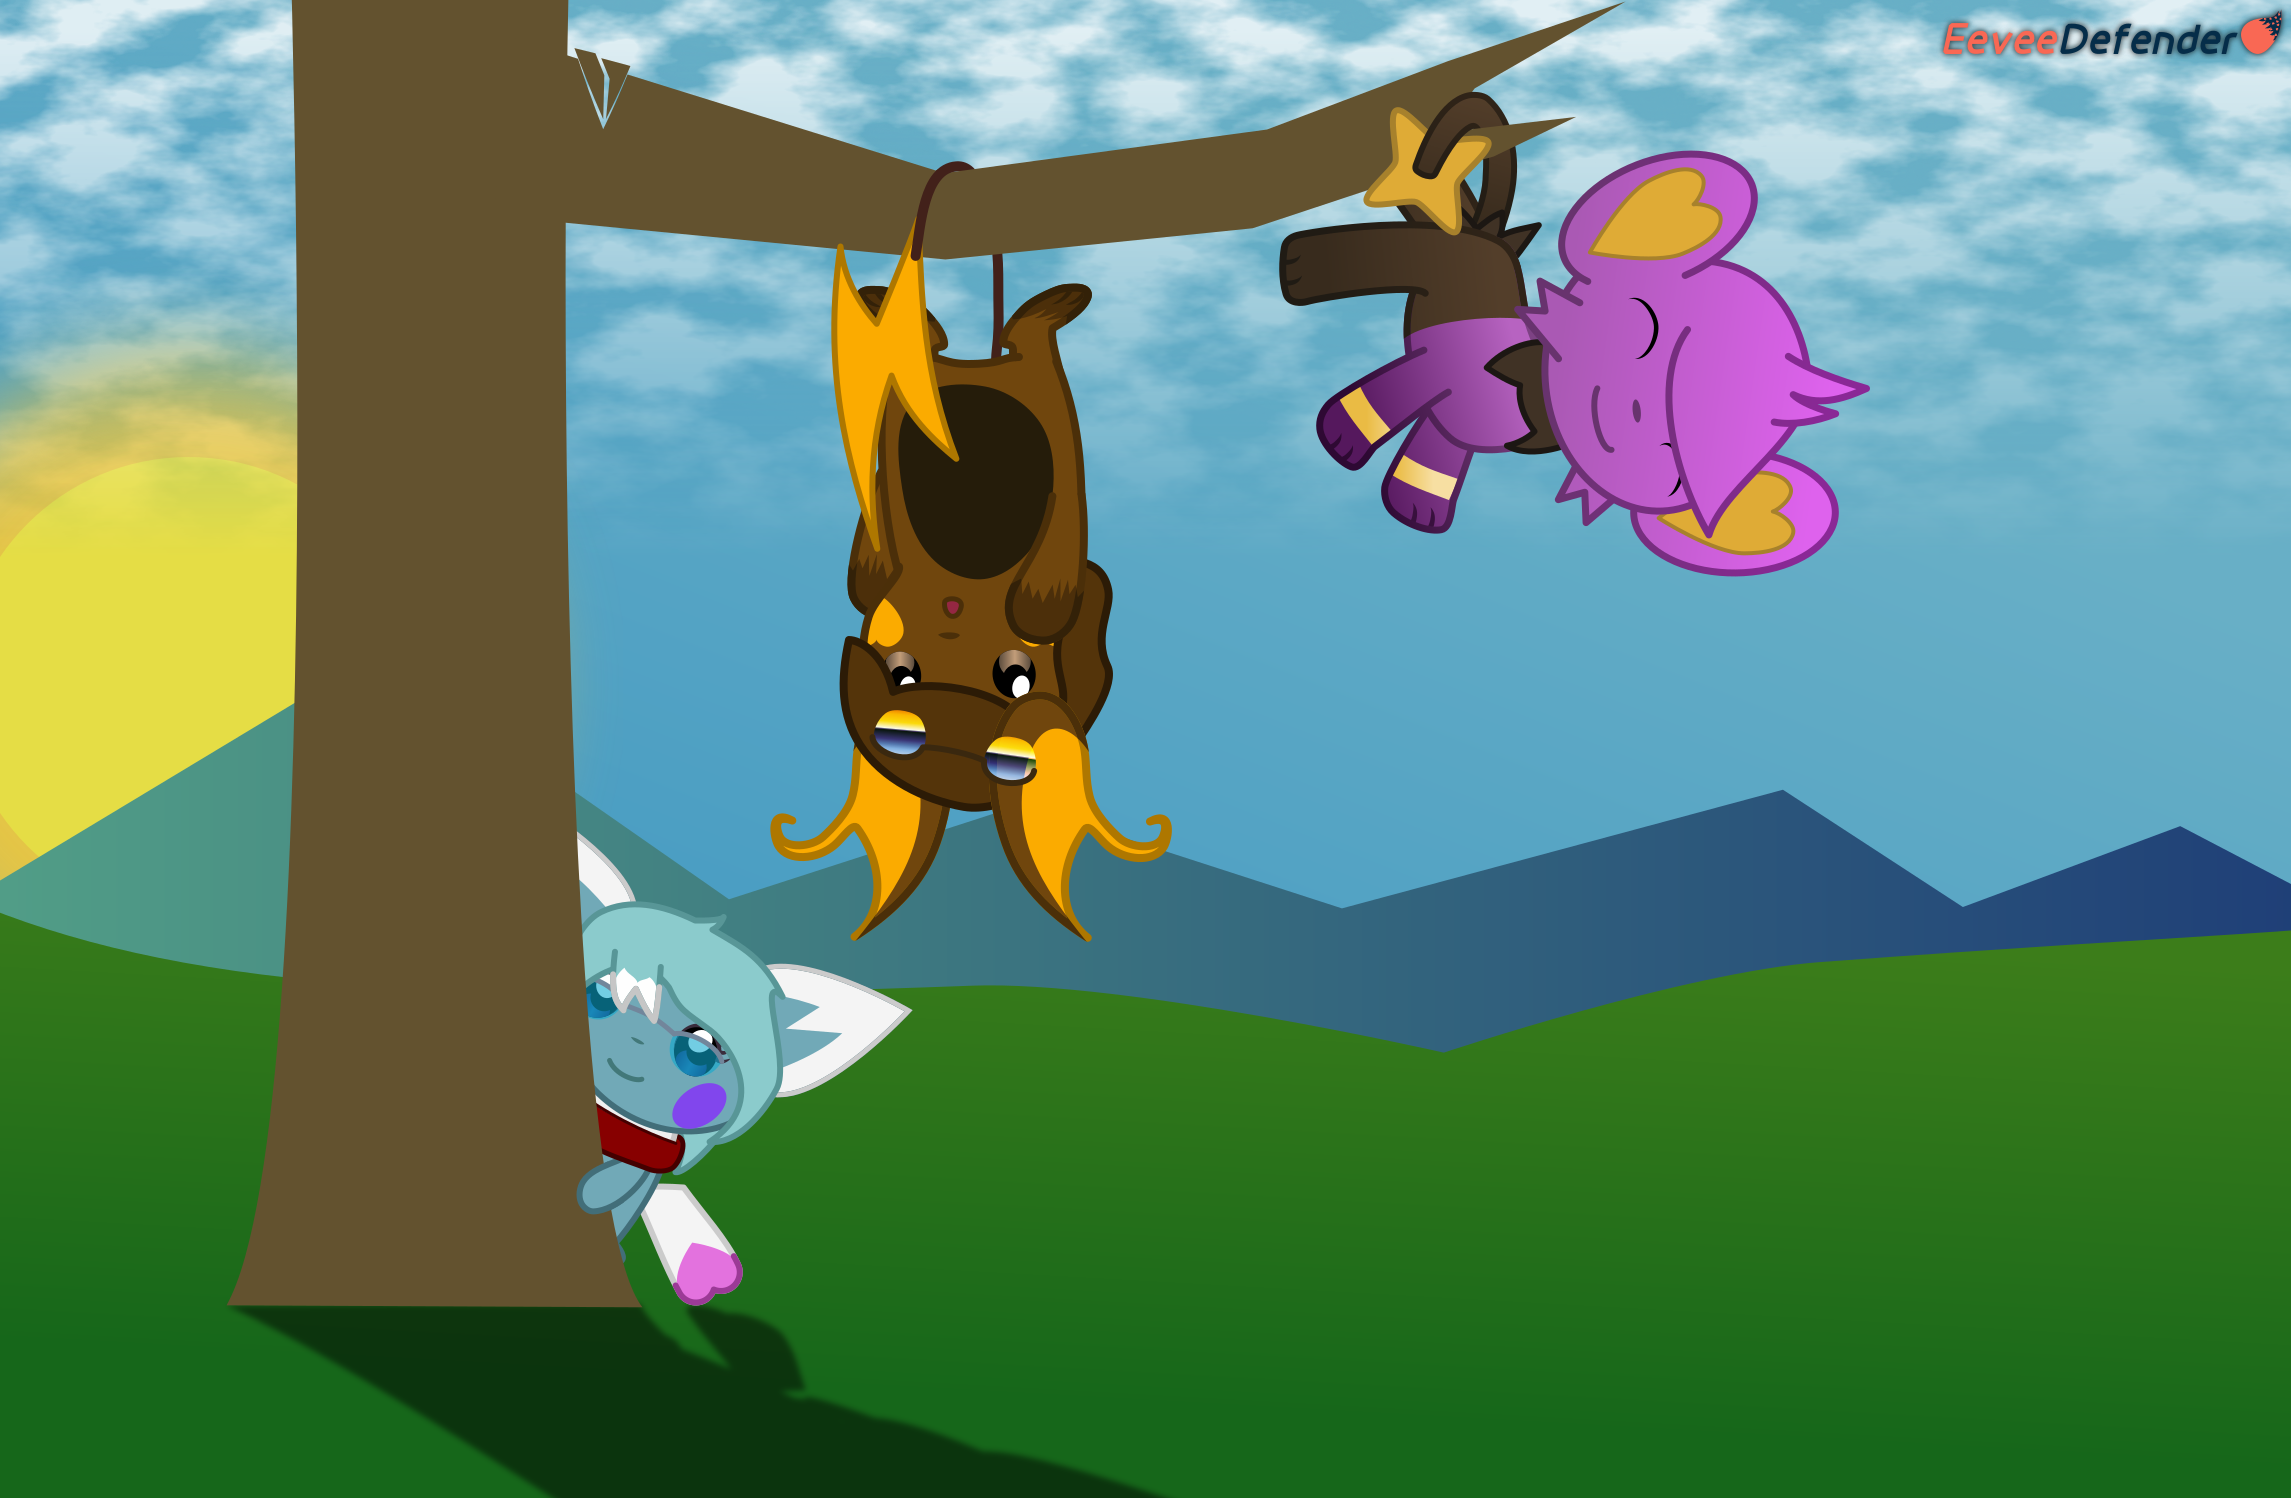 A shinx and a raichu are hanging their tails from a tree, looking like bats. A pichu peers from behind the tree.